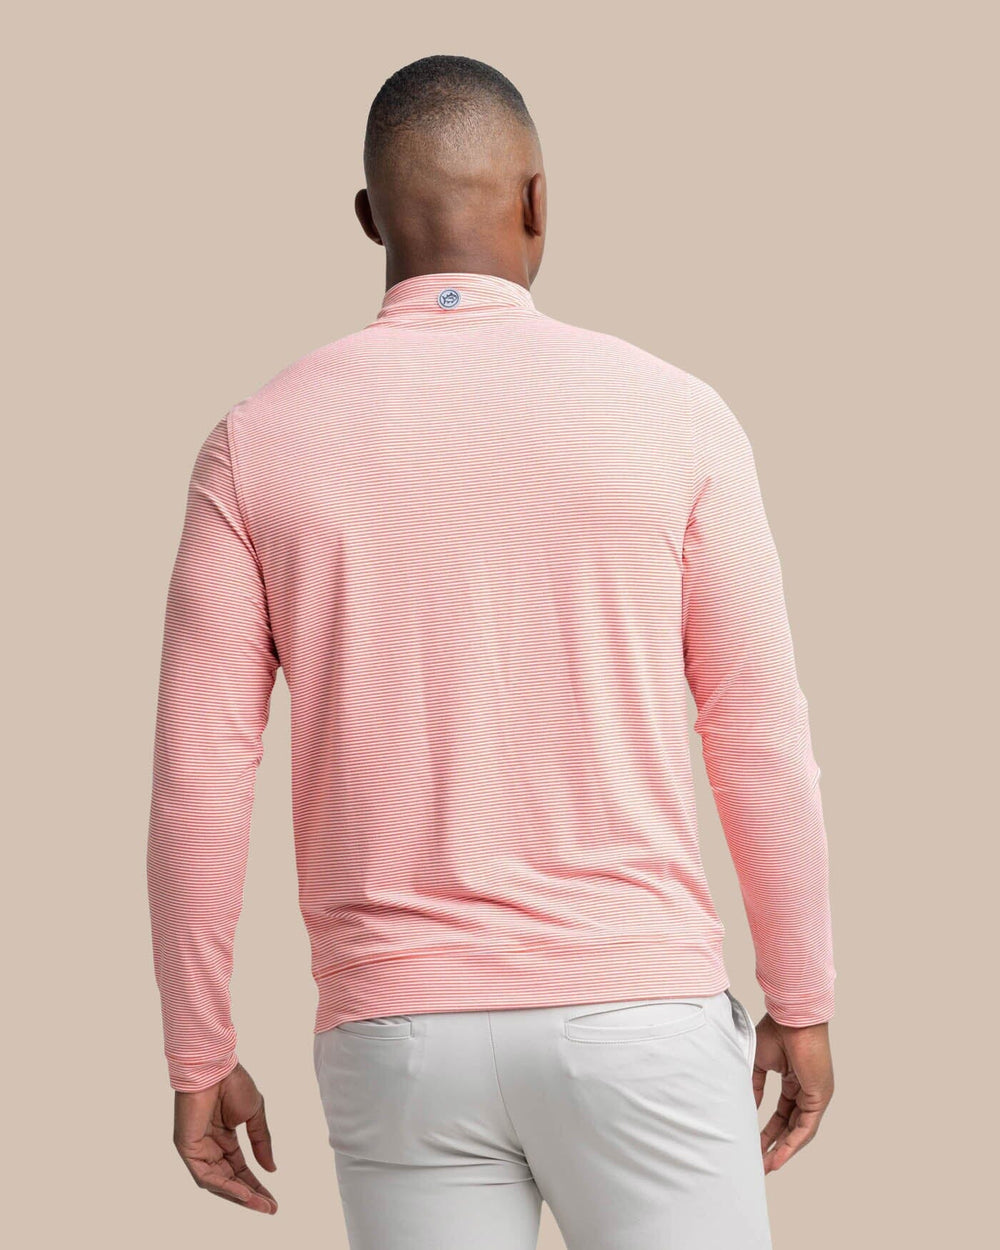 The back view of the Southern Tide Cruiser Micro-Stripe Heather Quarter Zip by Southern Tide - Heather Endzone Orange